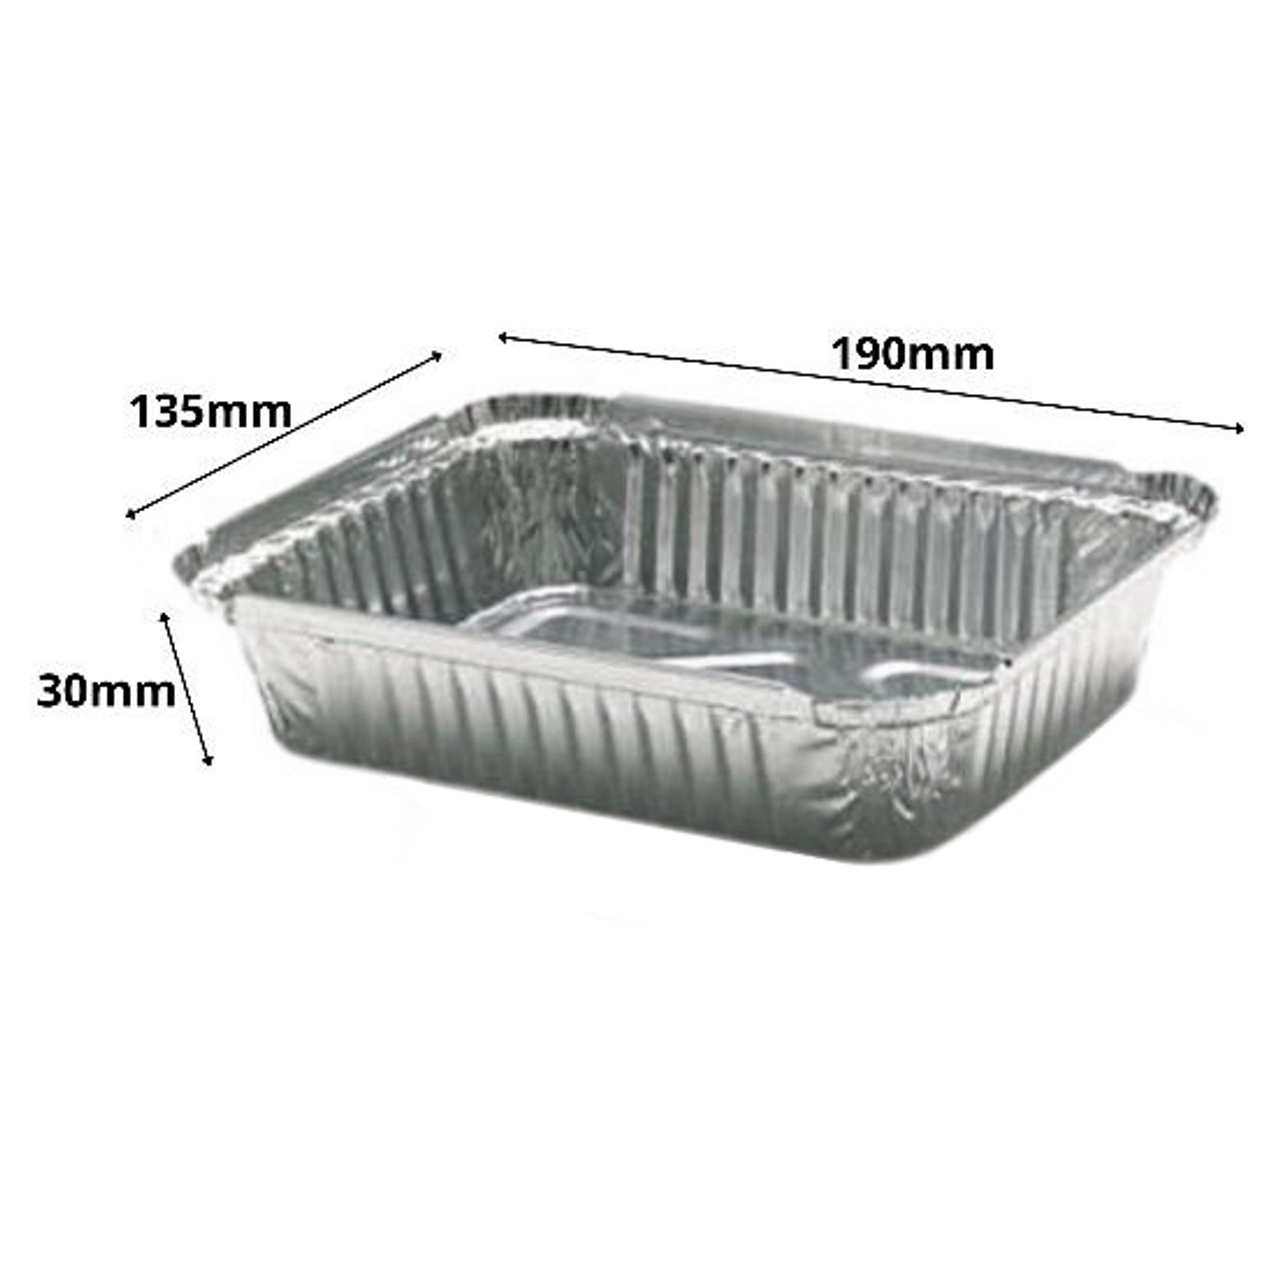 7.5"x 5.5"x 1.5" ( 190 x 135 x 35mm ) Medium Oblong Foil Containers Specials ( Case of 50 )